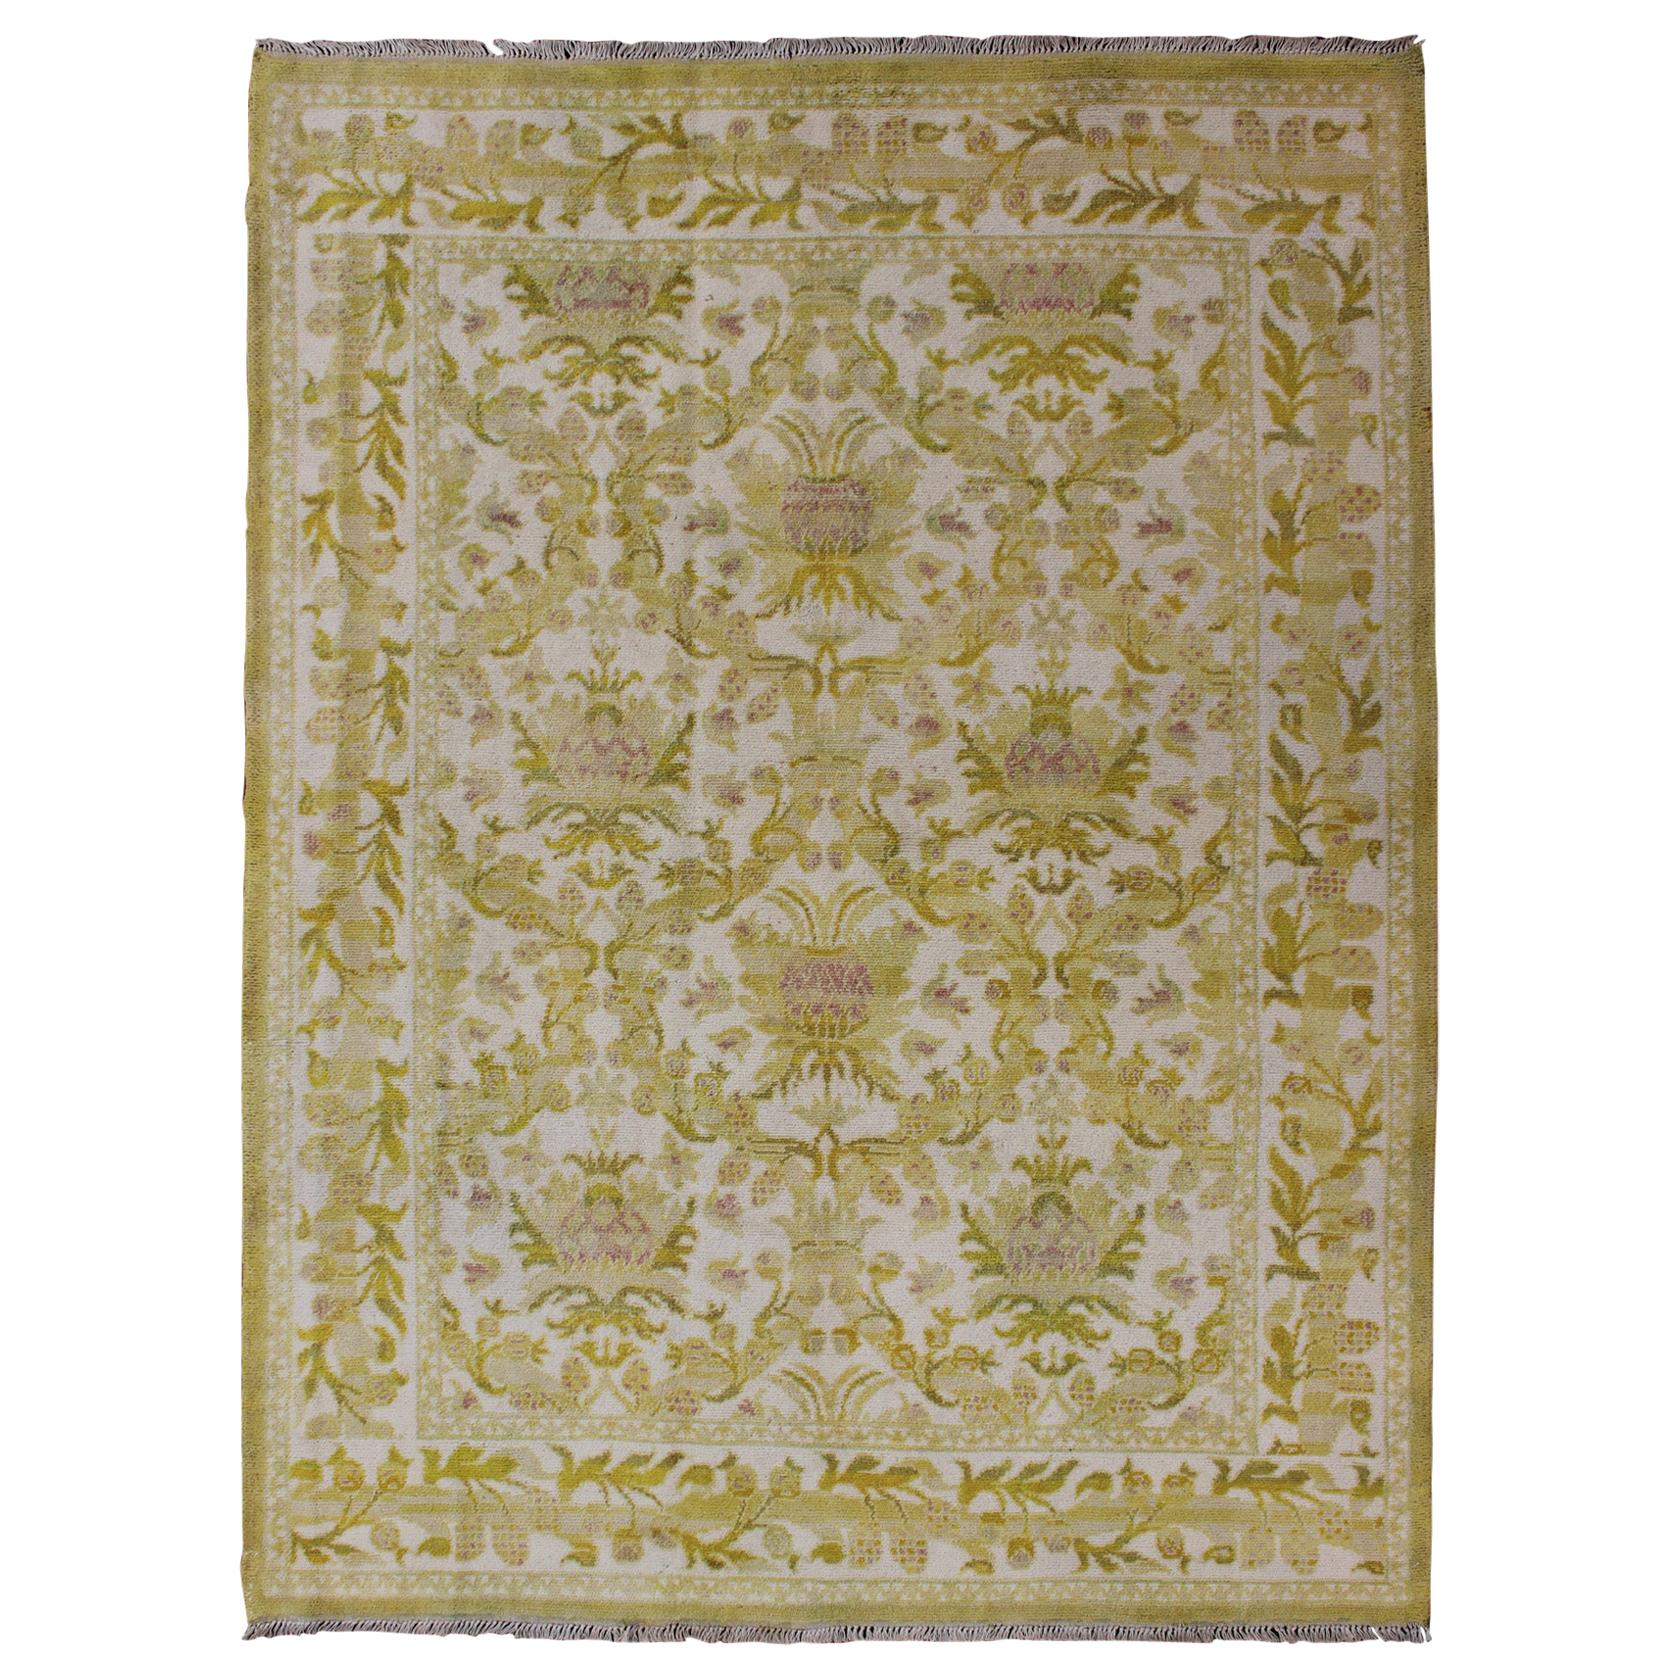 Elegant Spanish Rug with Floral Design in Golden-Green, Acid Green and White For Sale